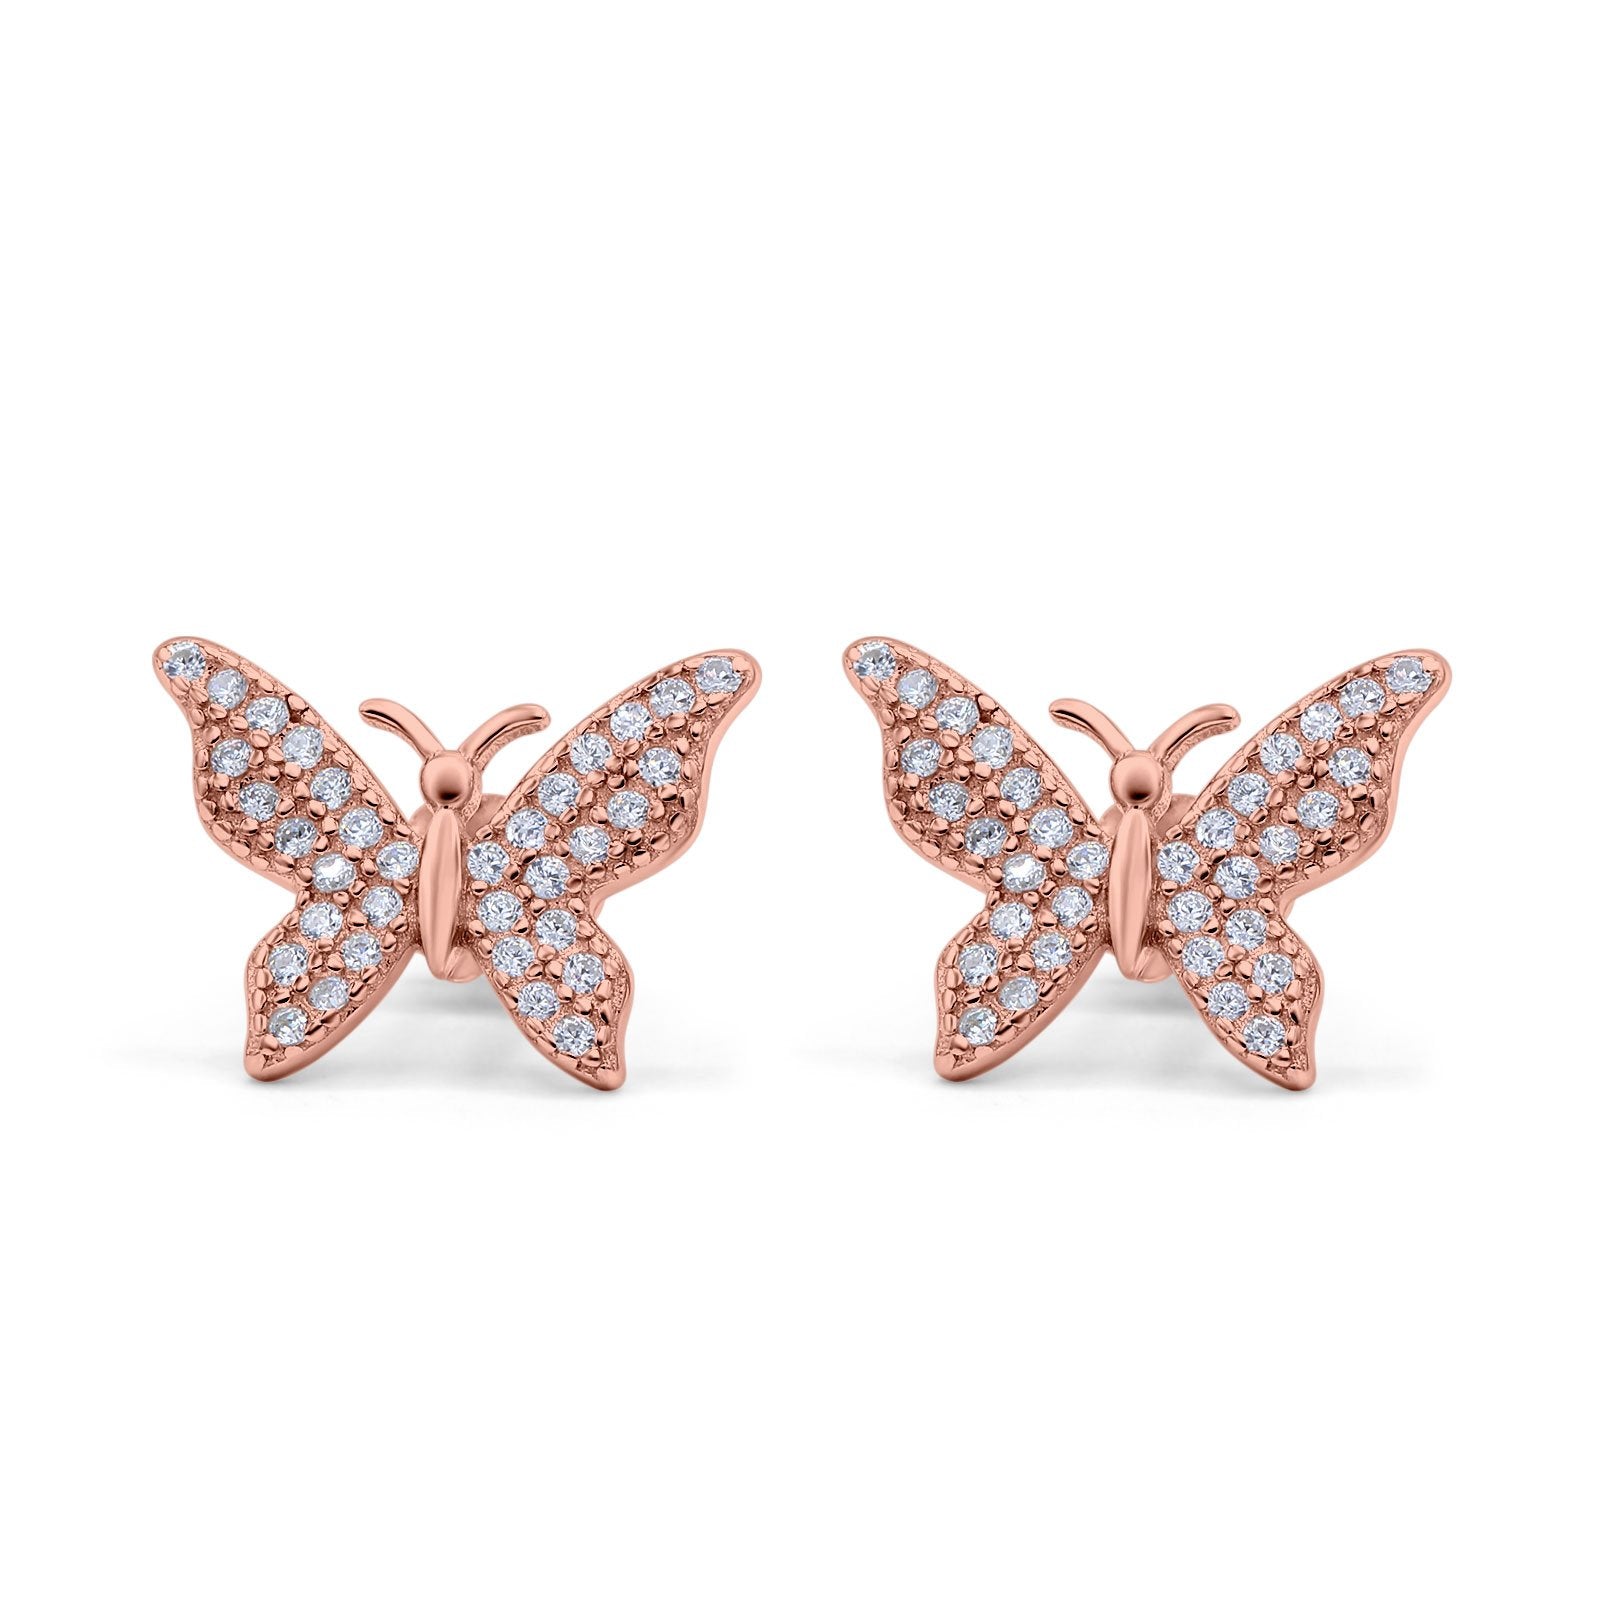 Butterfly Stud Earrings Simulated Cubic Zirconia 925 Sterling Silver (14mm)